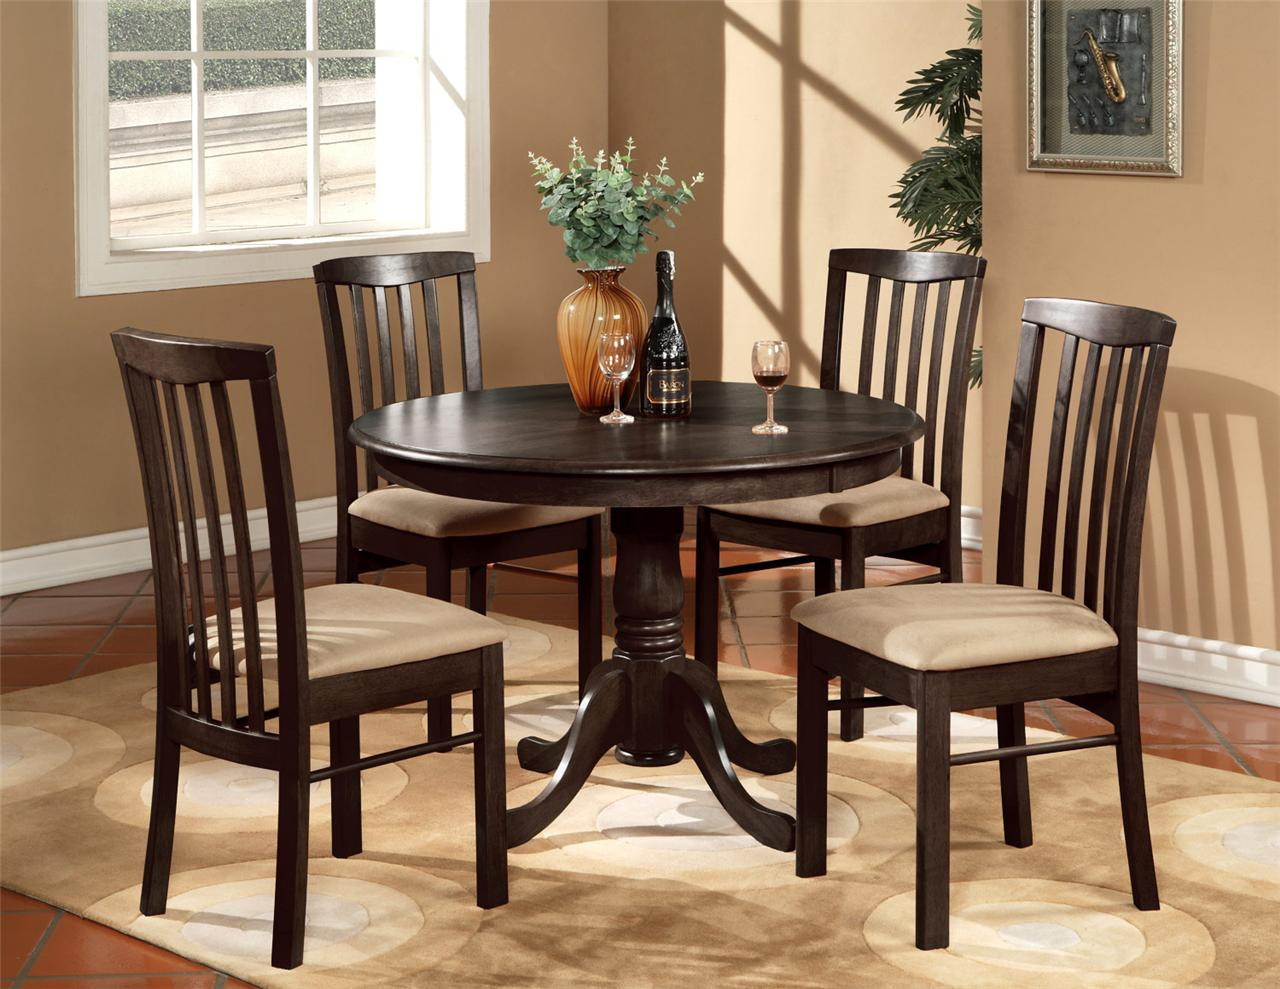 Small Round Kitchen Table Sets
 5PC ROUND 42" KITCHEN DINETTE SET TABLE AND 4 WOOD OR